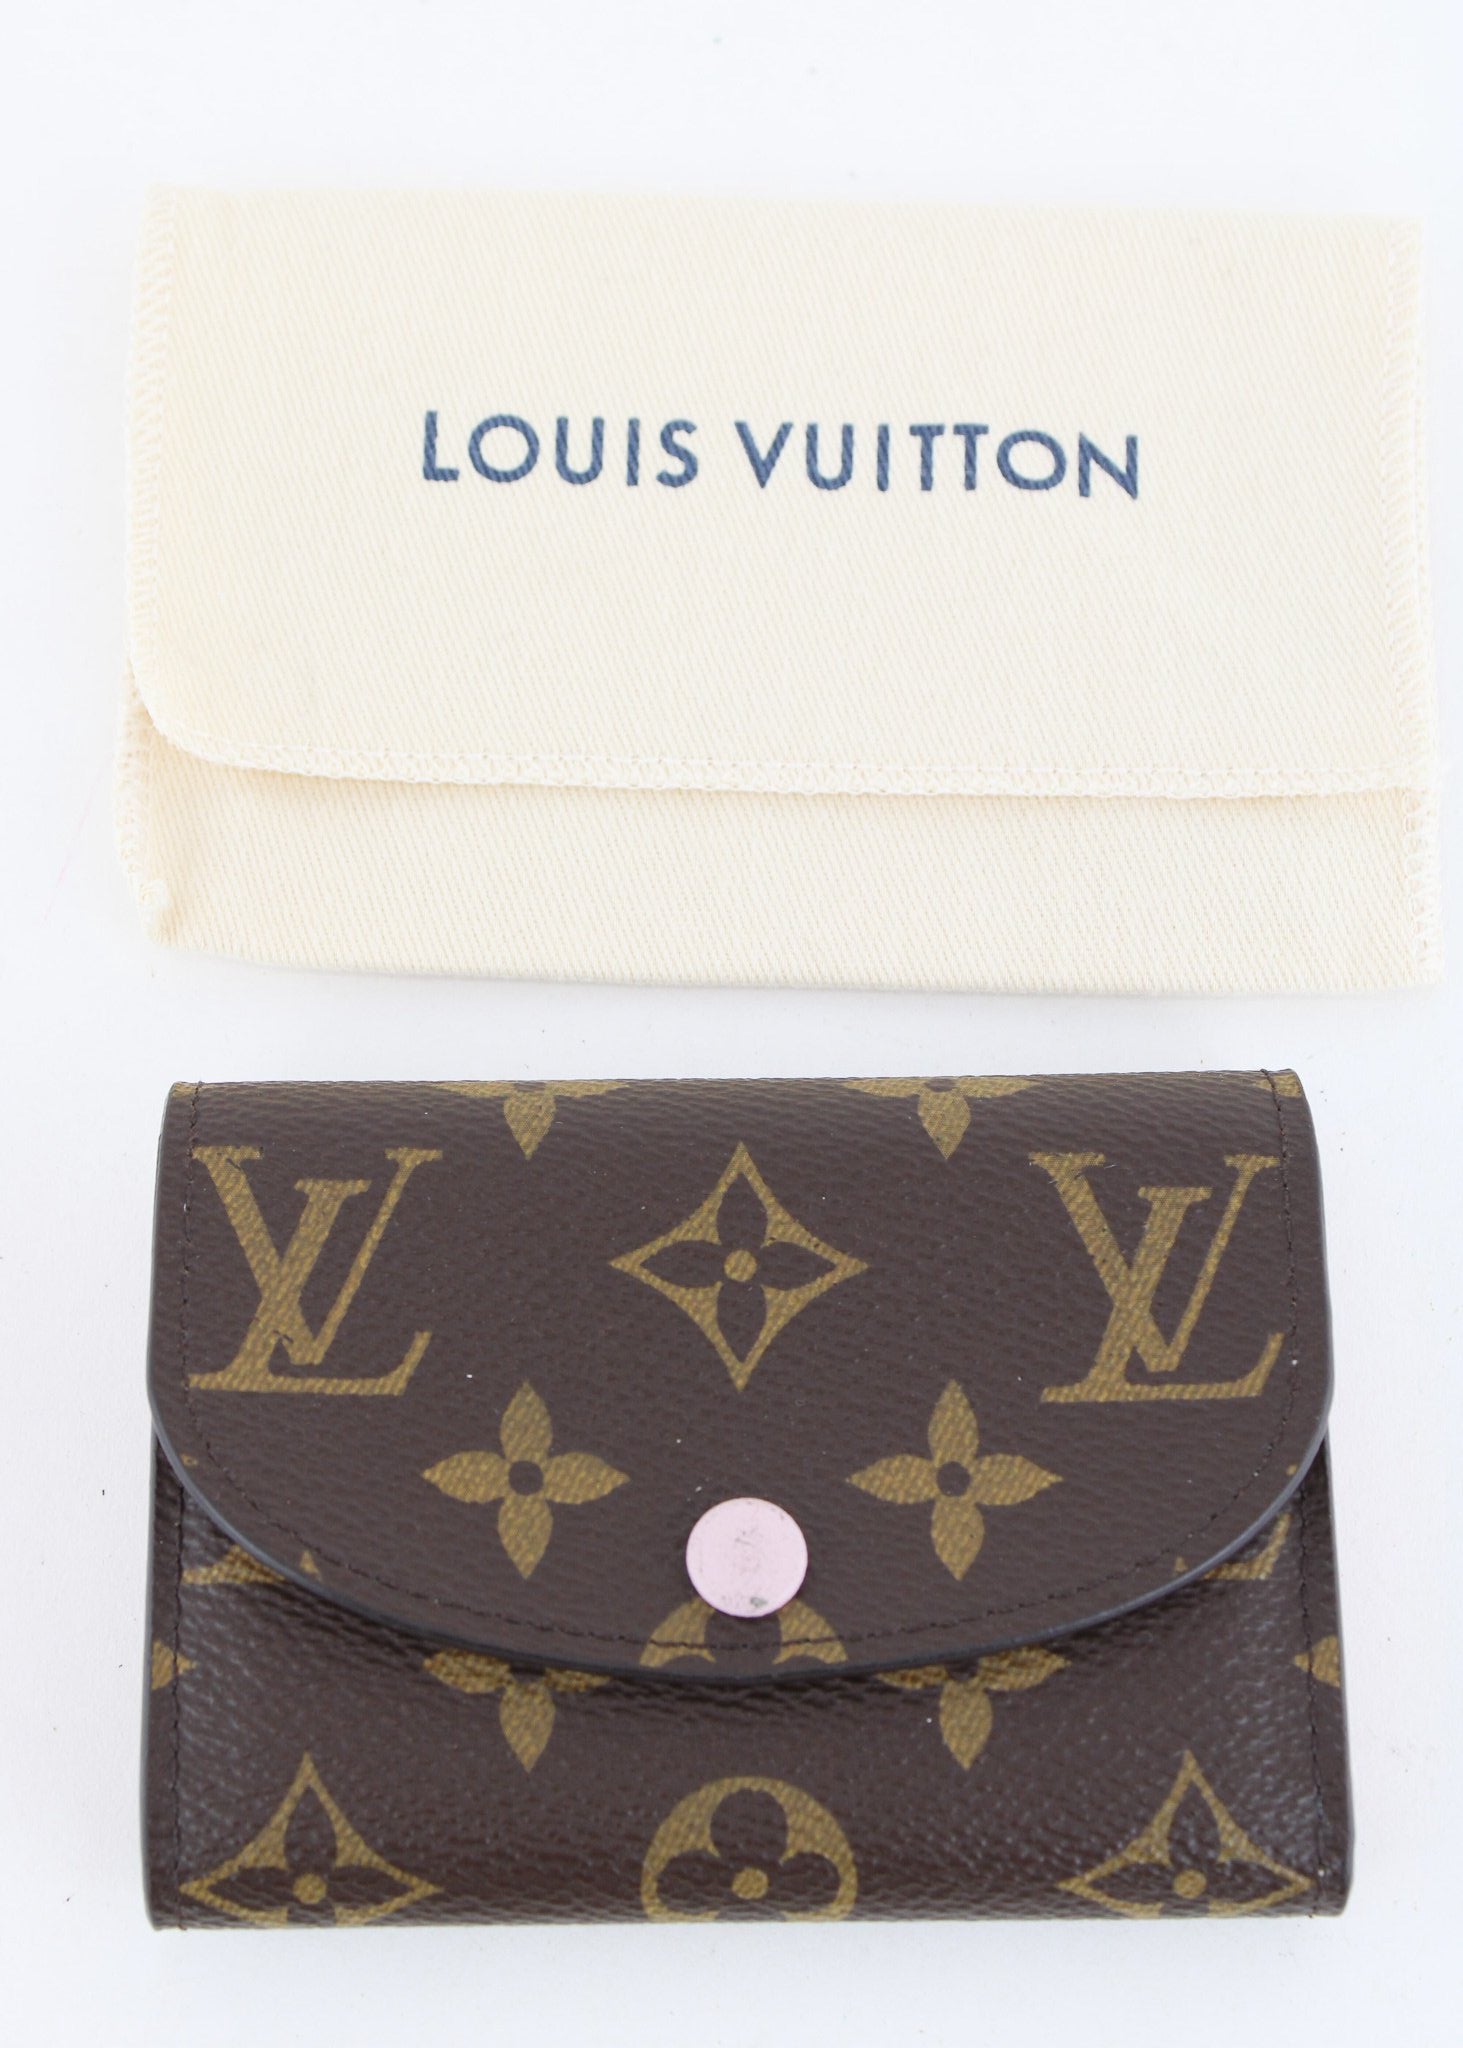 Louis Vuitton - Authenticated Rosalie Purse - Leather Yellow Plain for Women, Very Good Condition